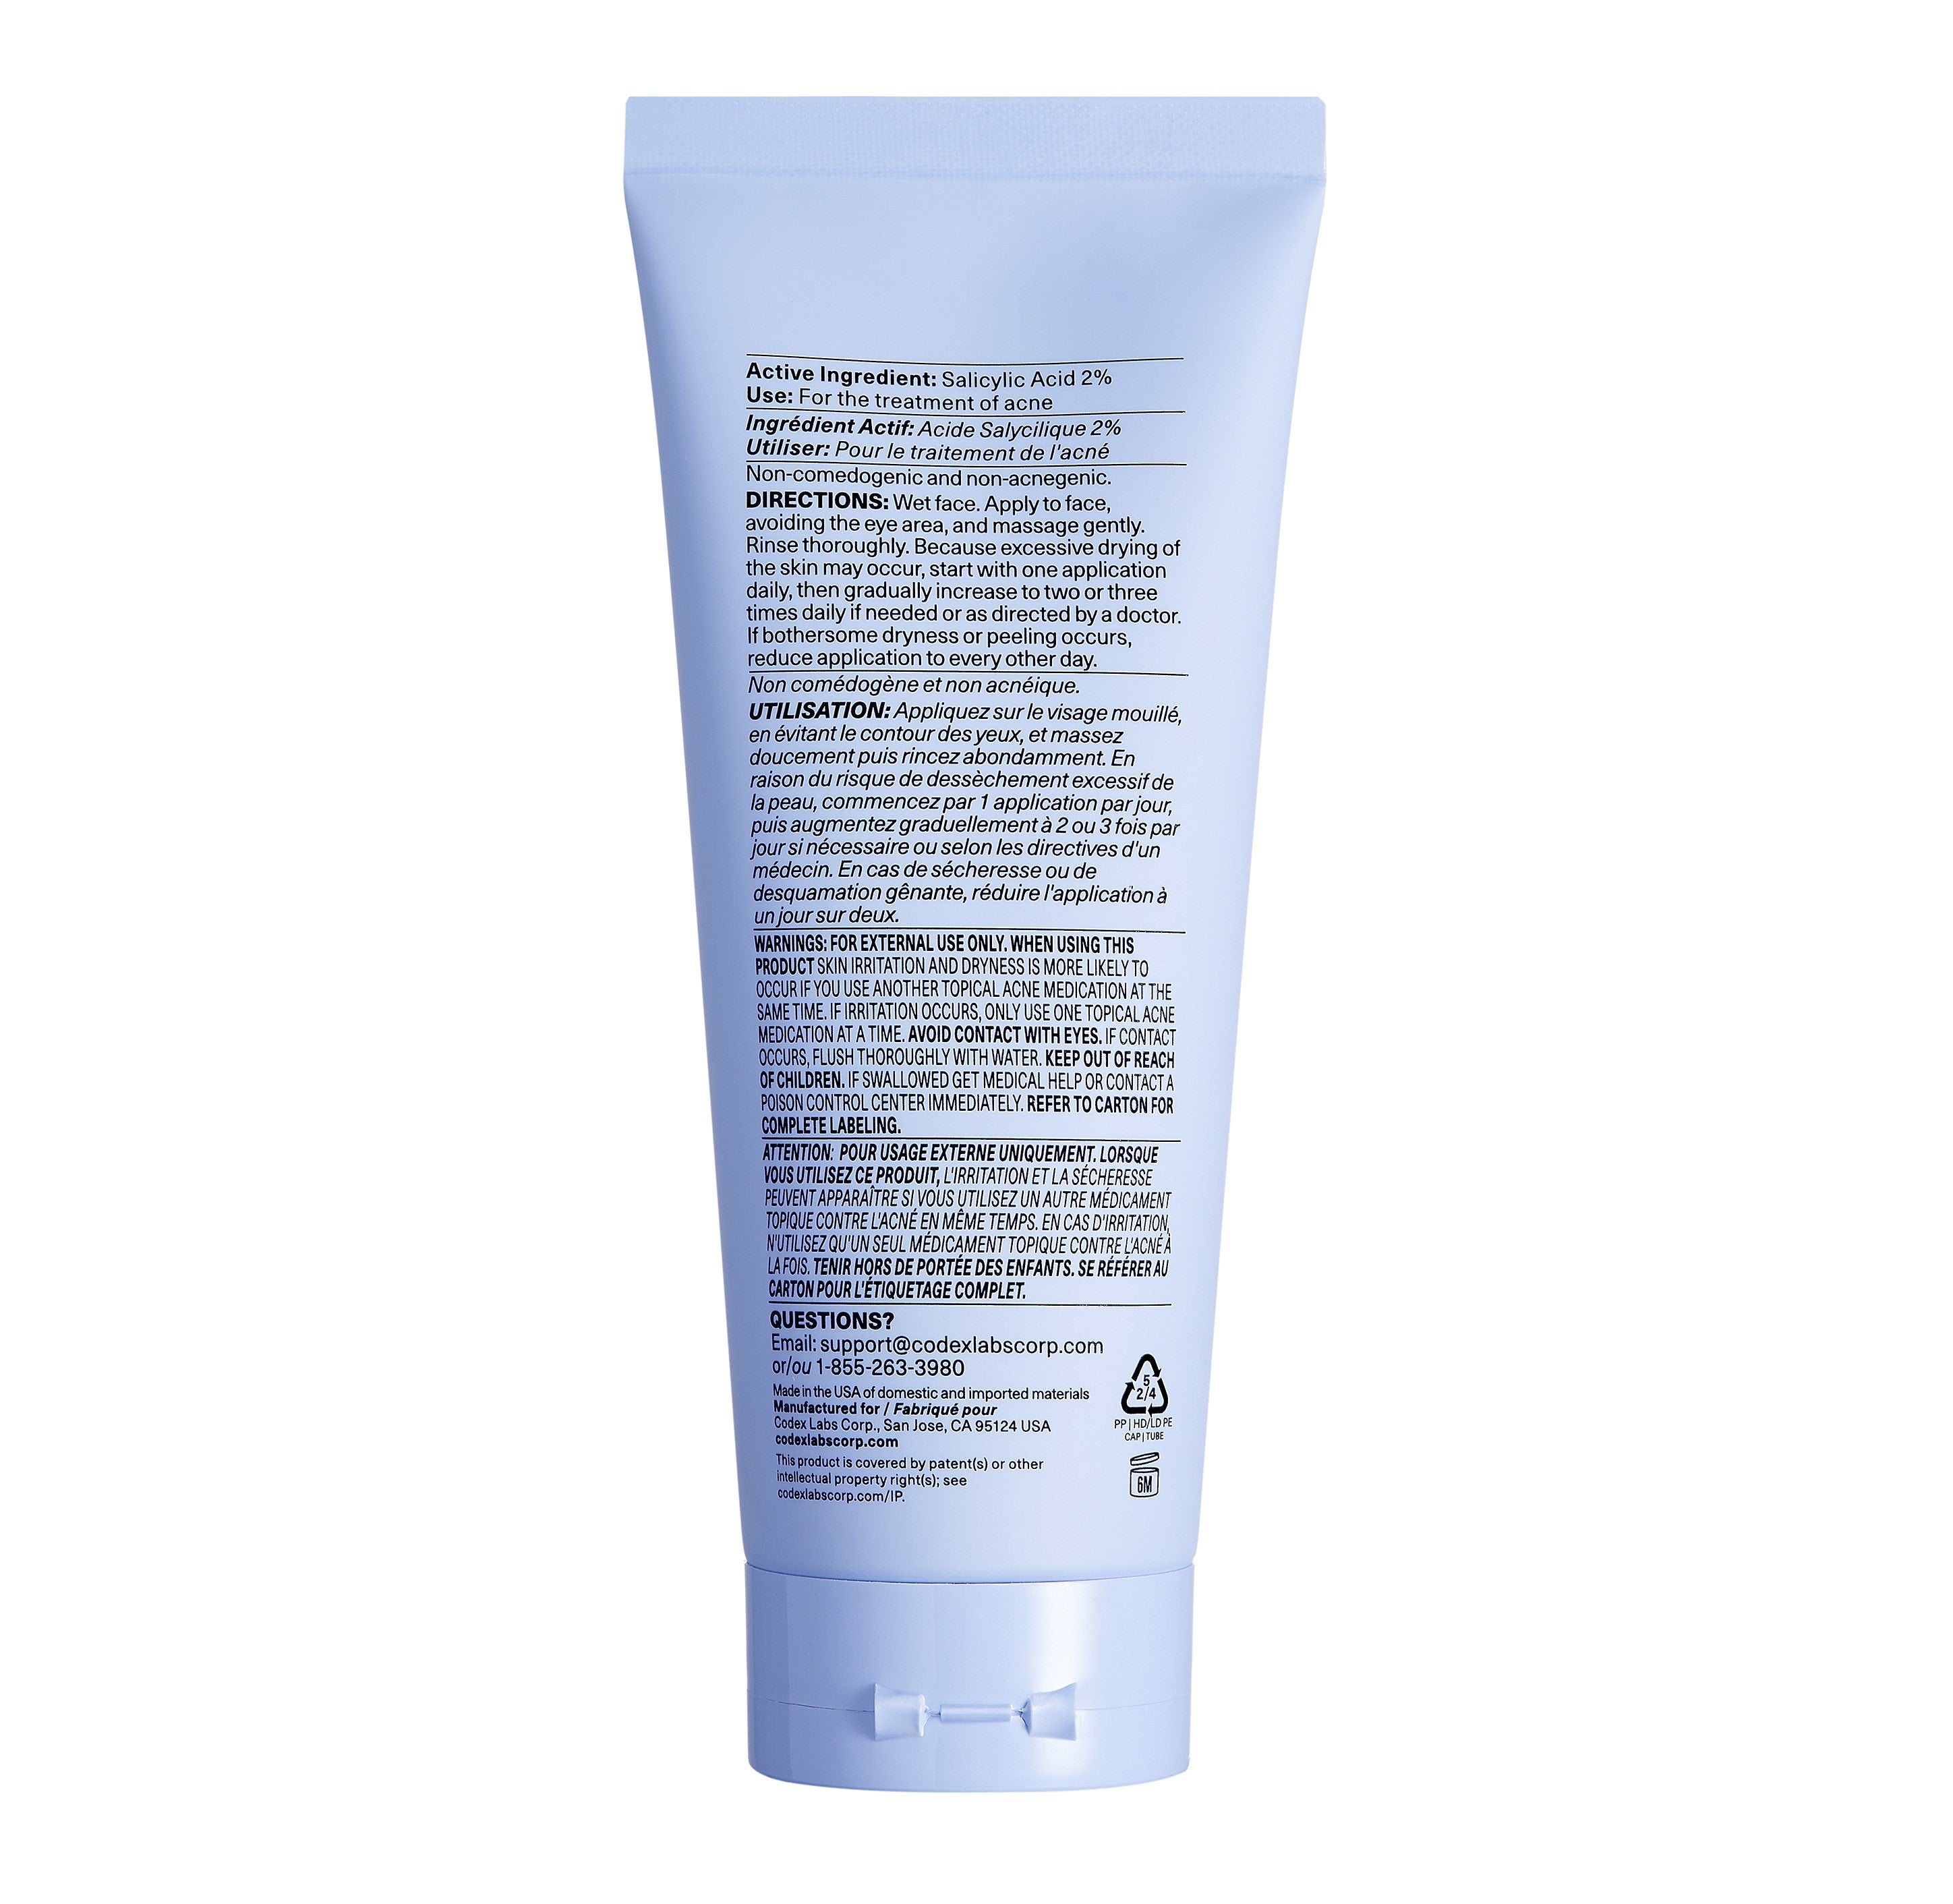 Shaant Pore Purifying Acne Face Scrub